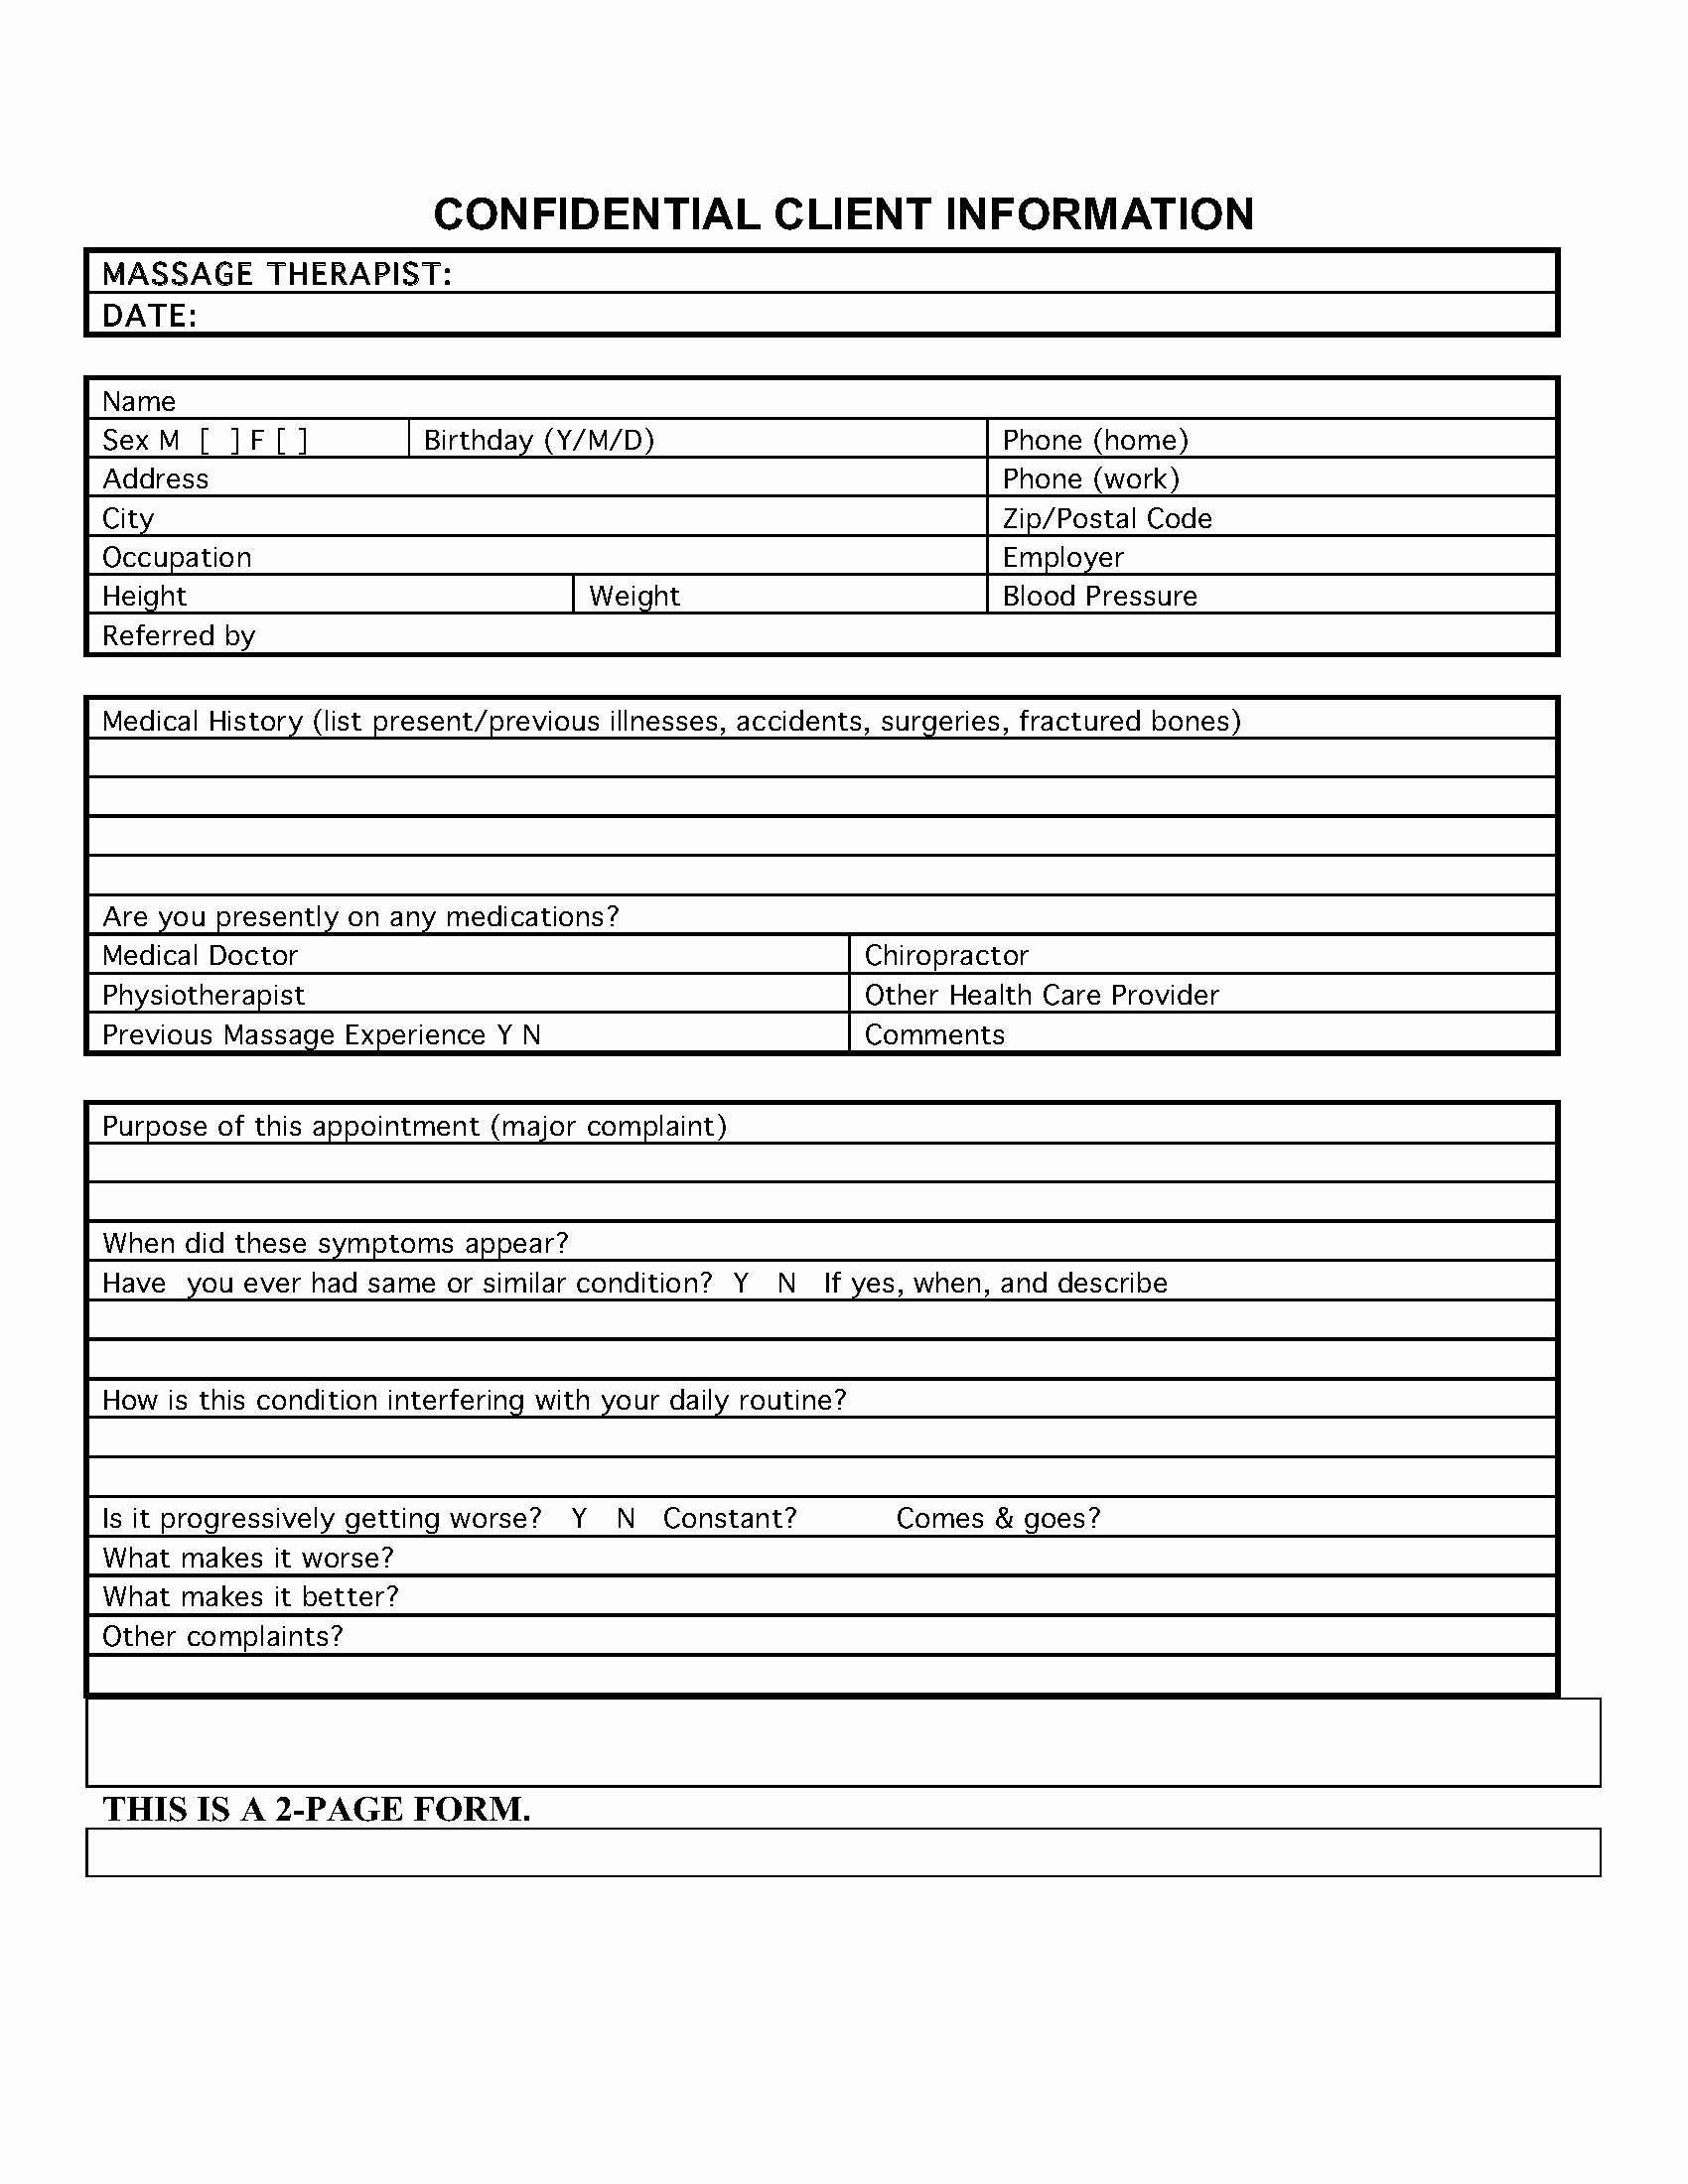 Patient Information Sheet Template Awesome Confidential Patient Information Sheet for Massage therapy